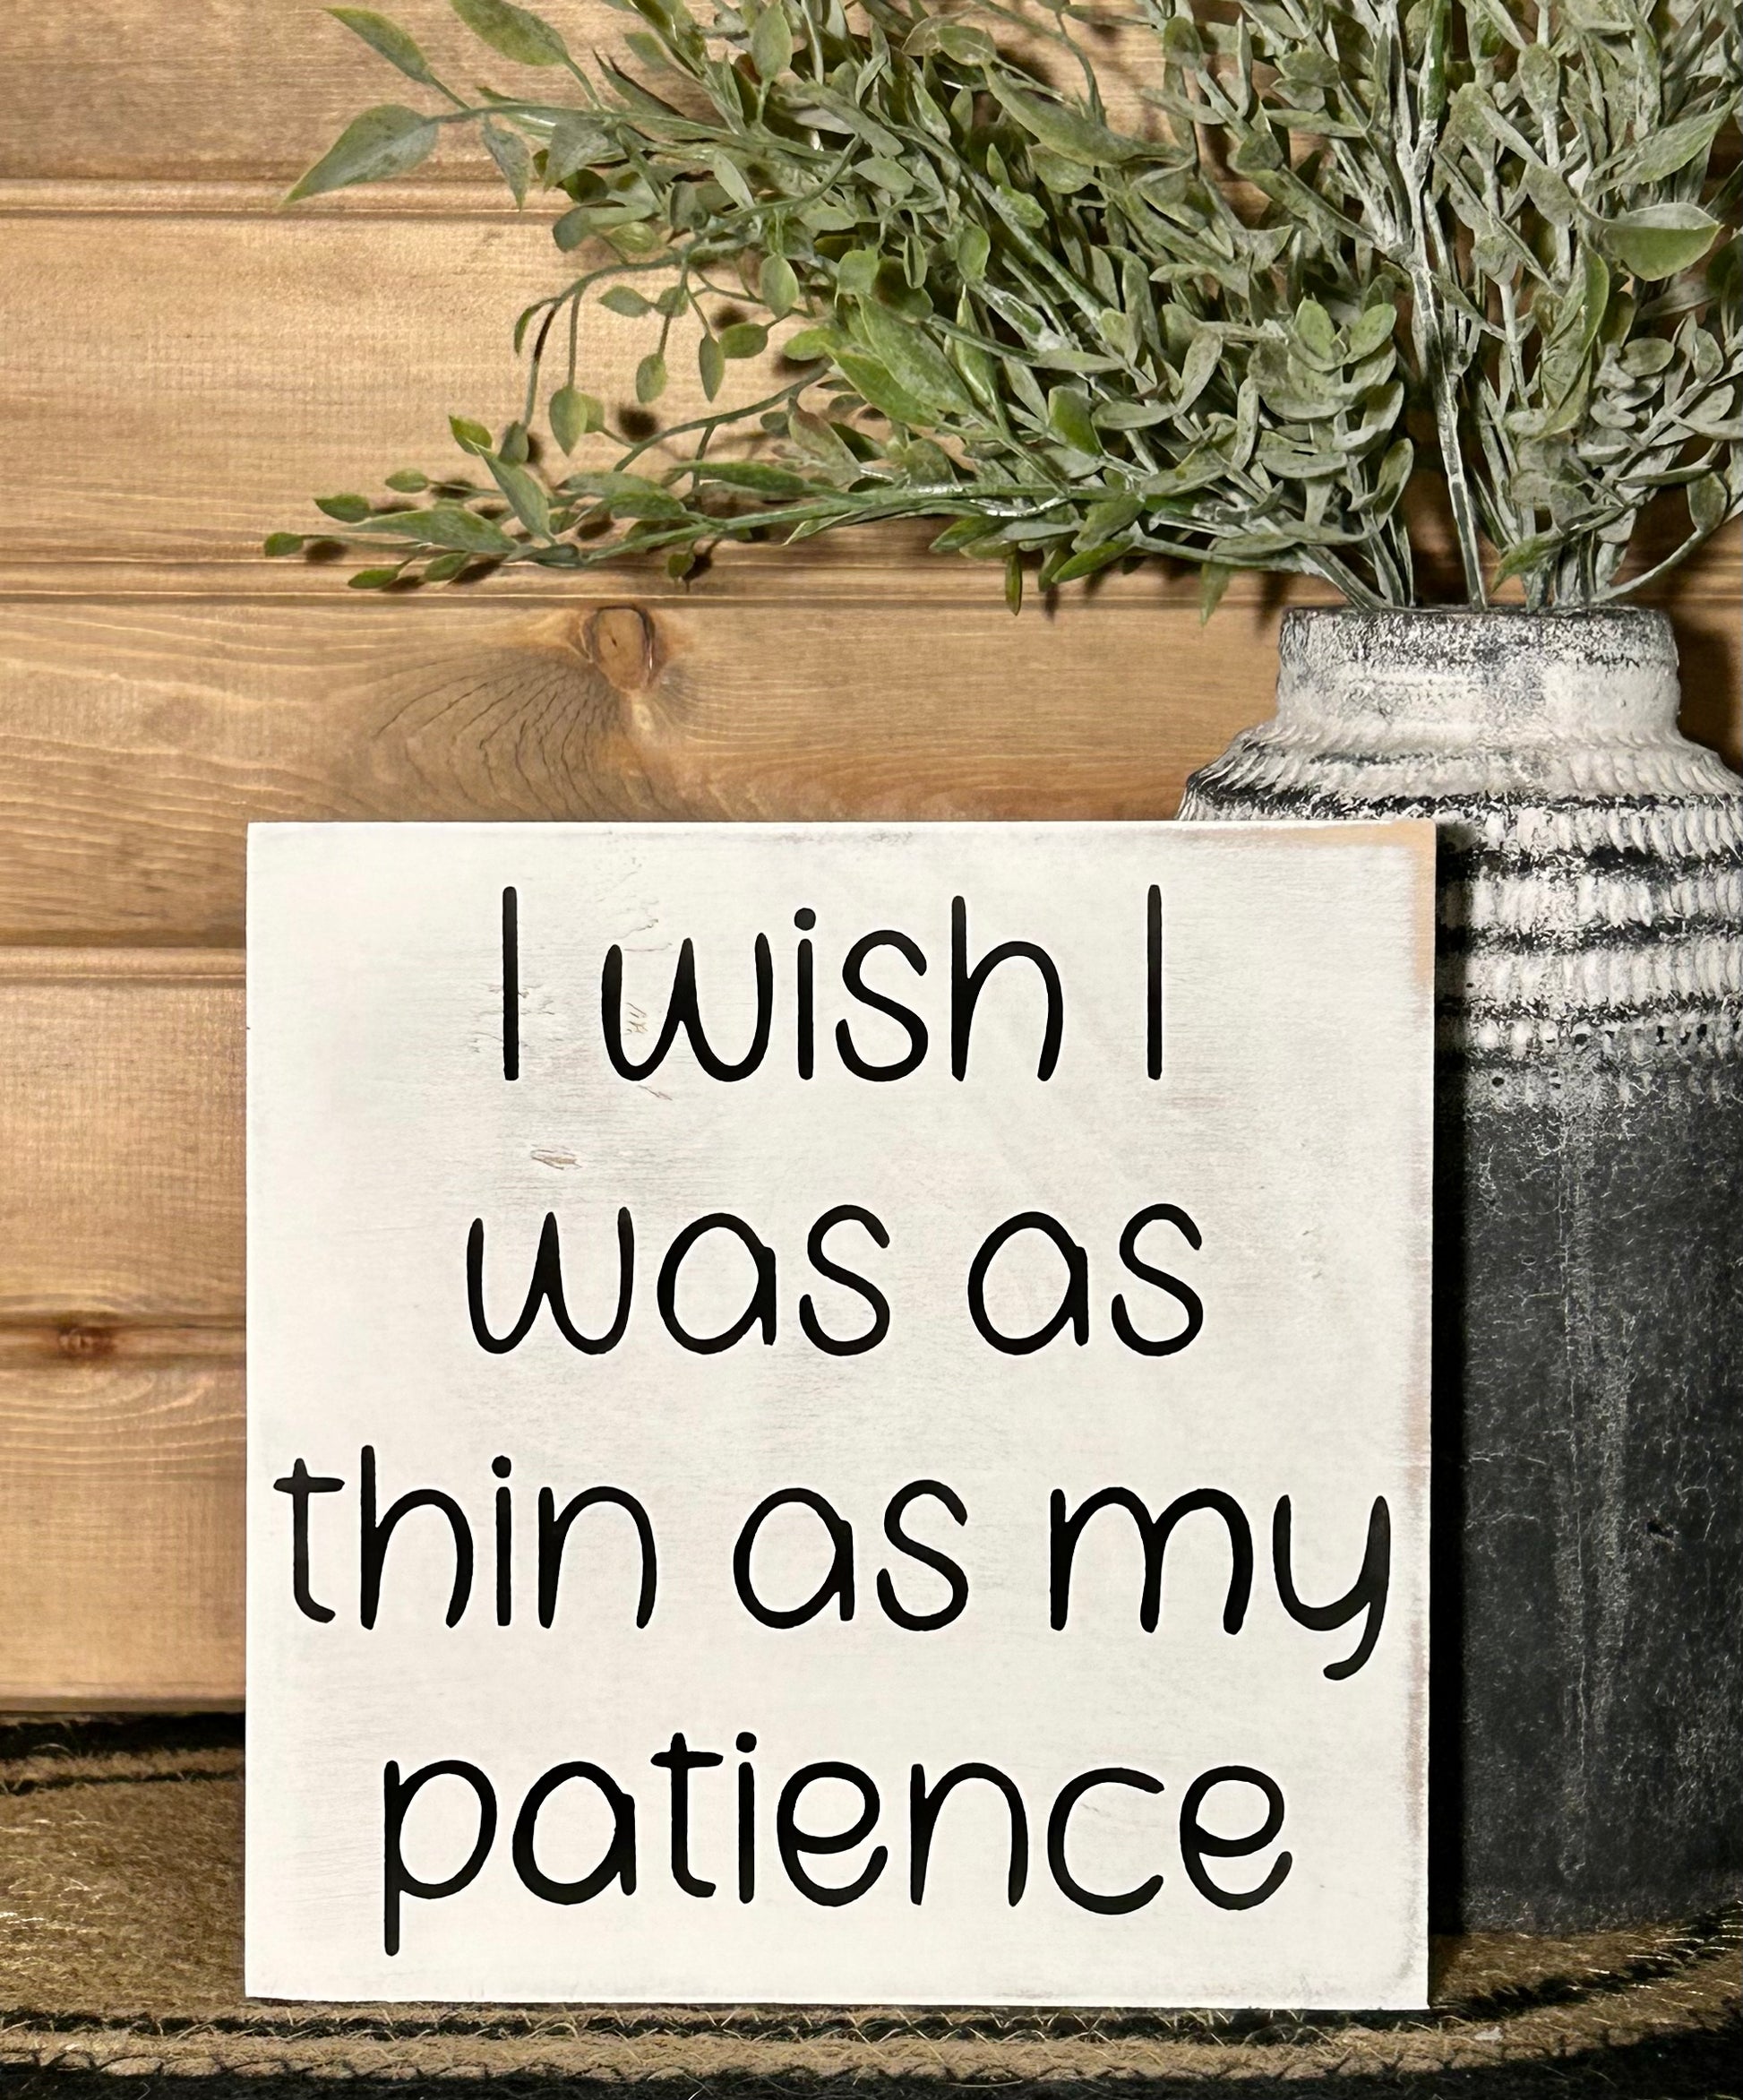 "Thin patience" funny wood sign